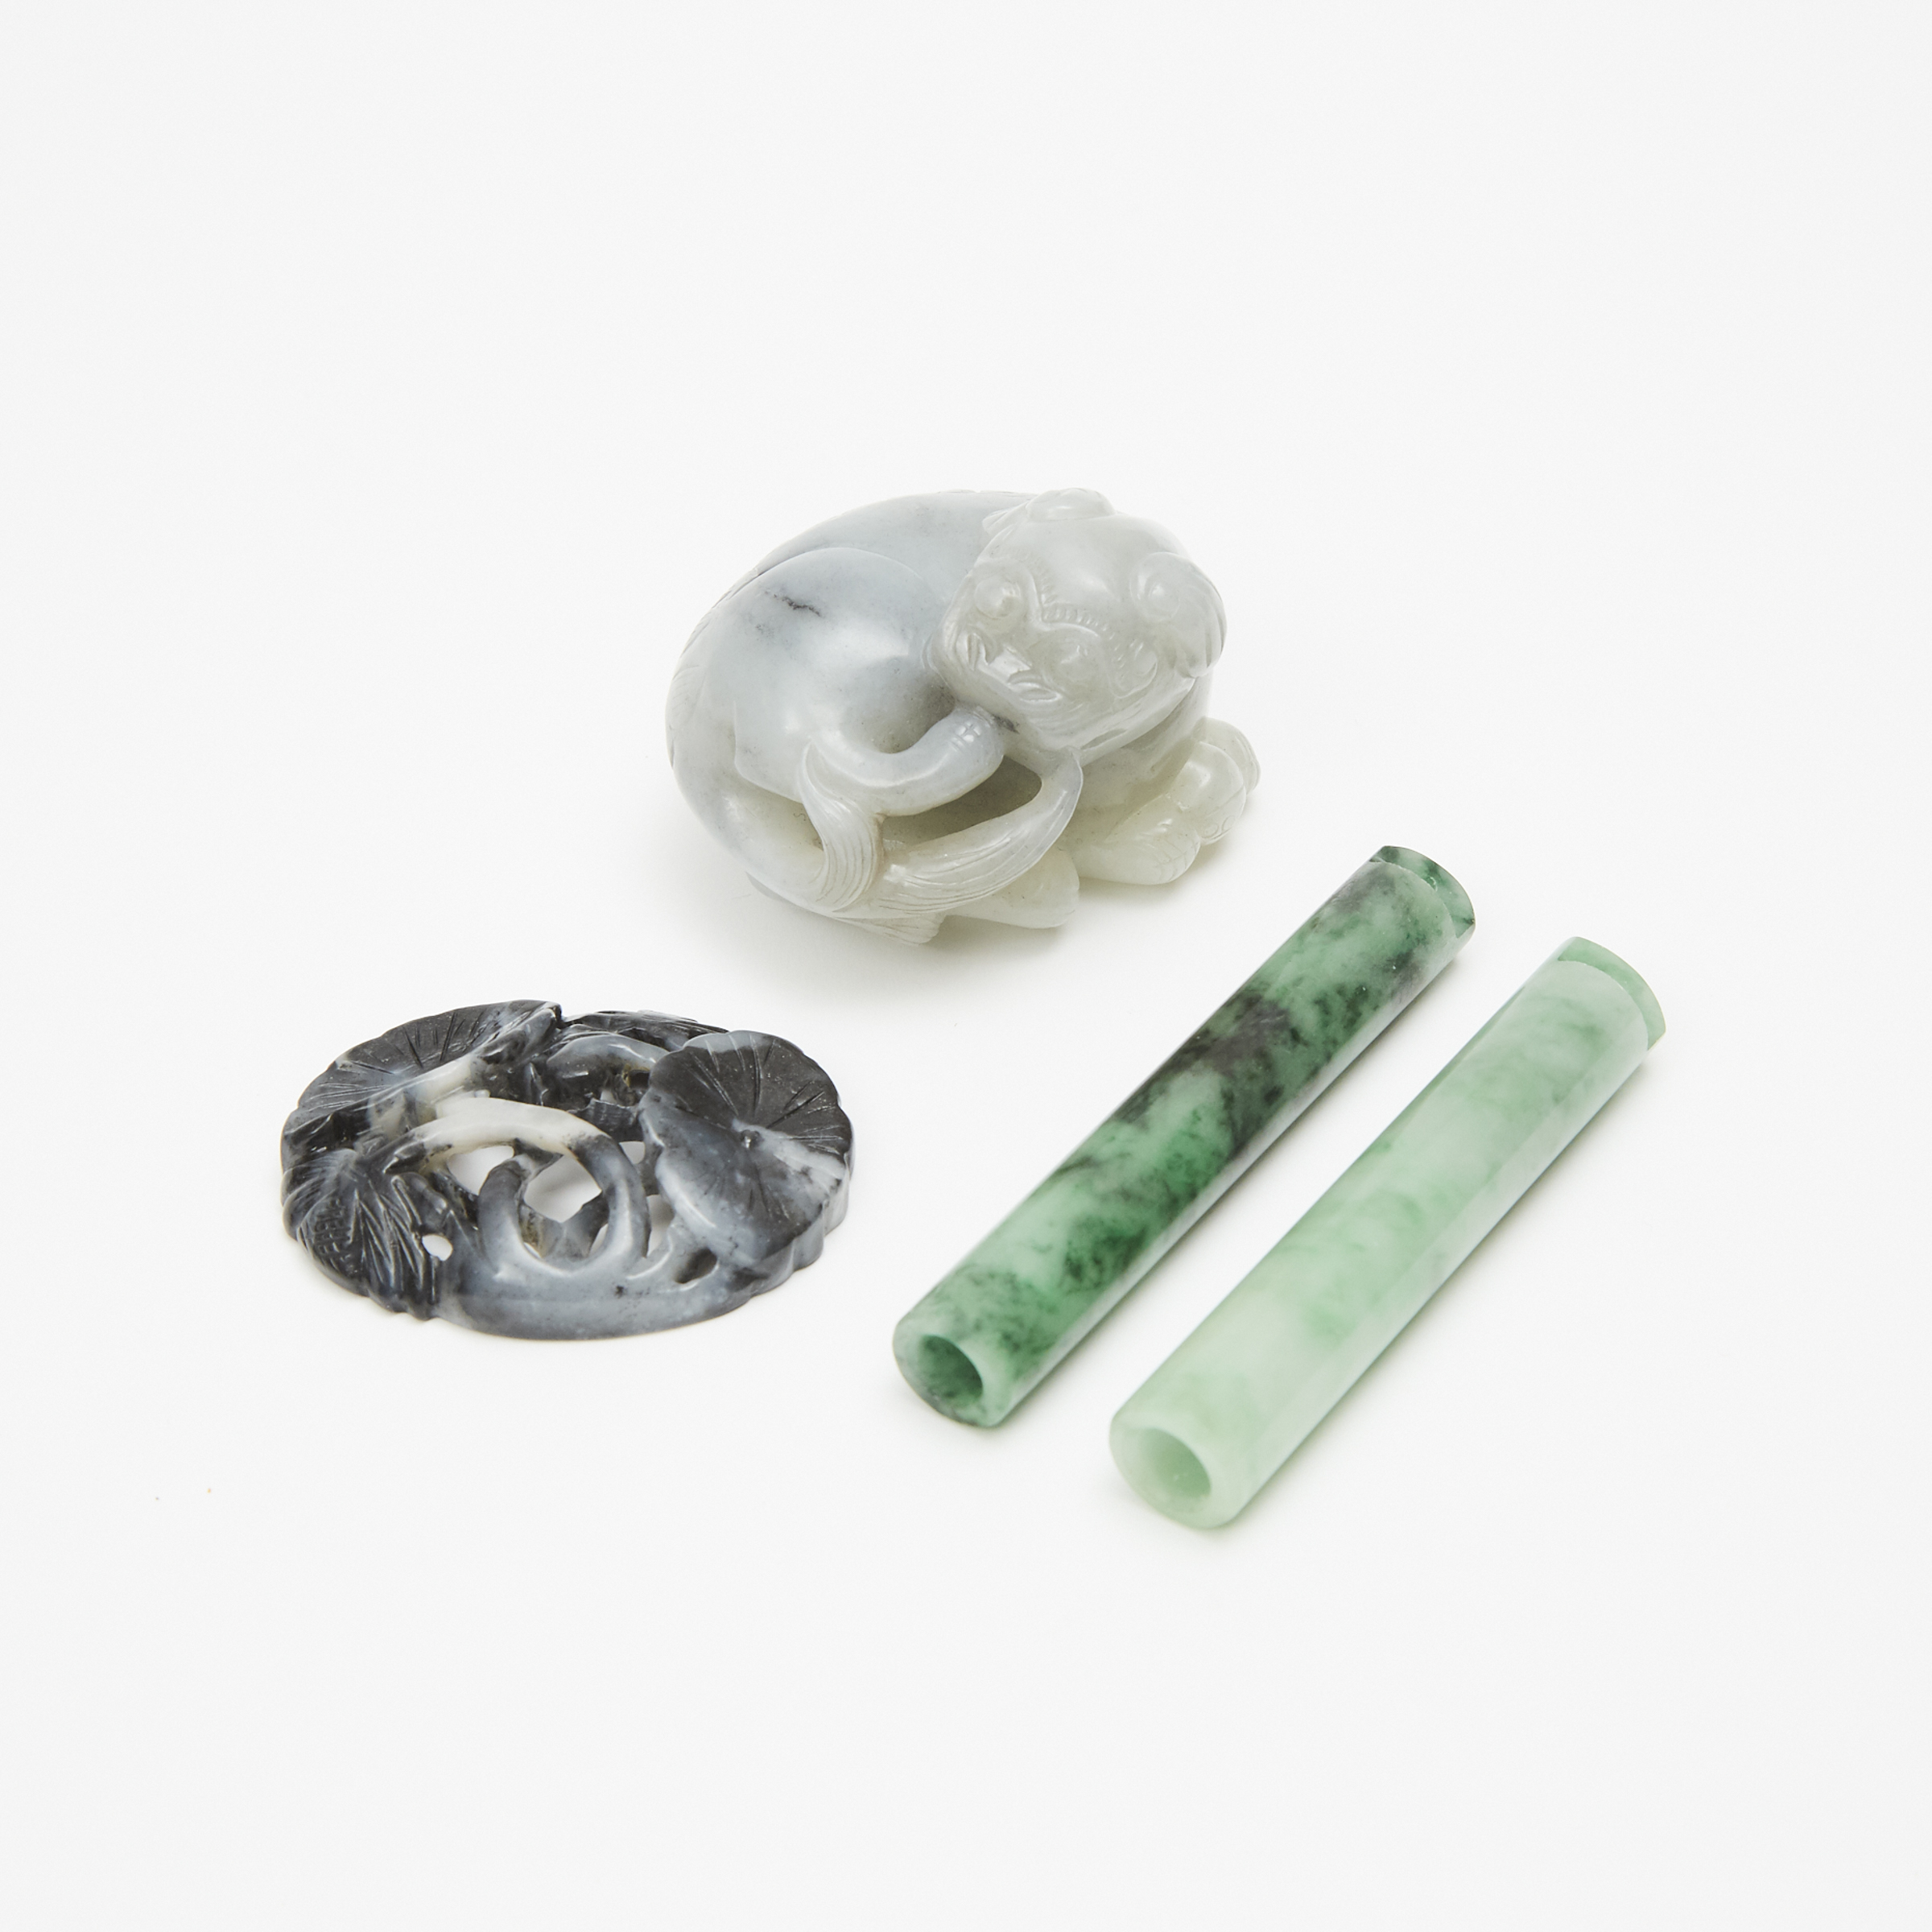 Two Jadeite Quill Tubes, a Greyish-White Jade Carved Fu Dog, and a Black and White Jade Carved 'Lotus' Plaque